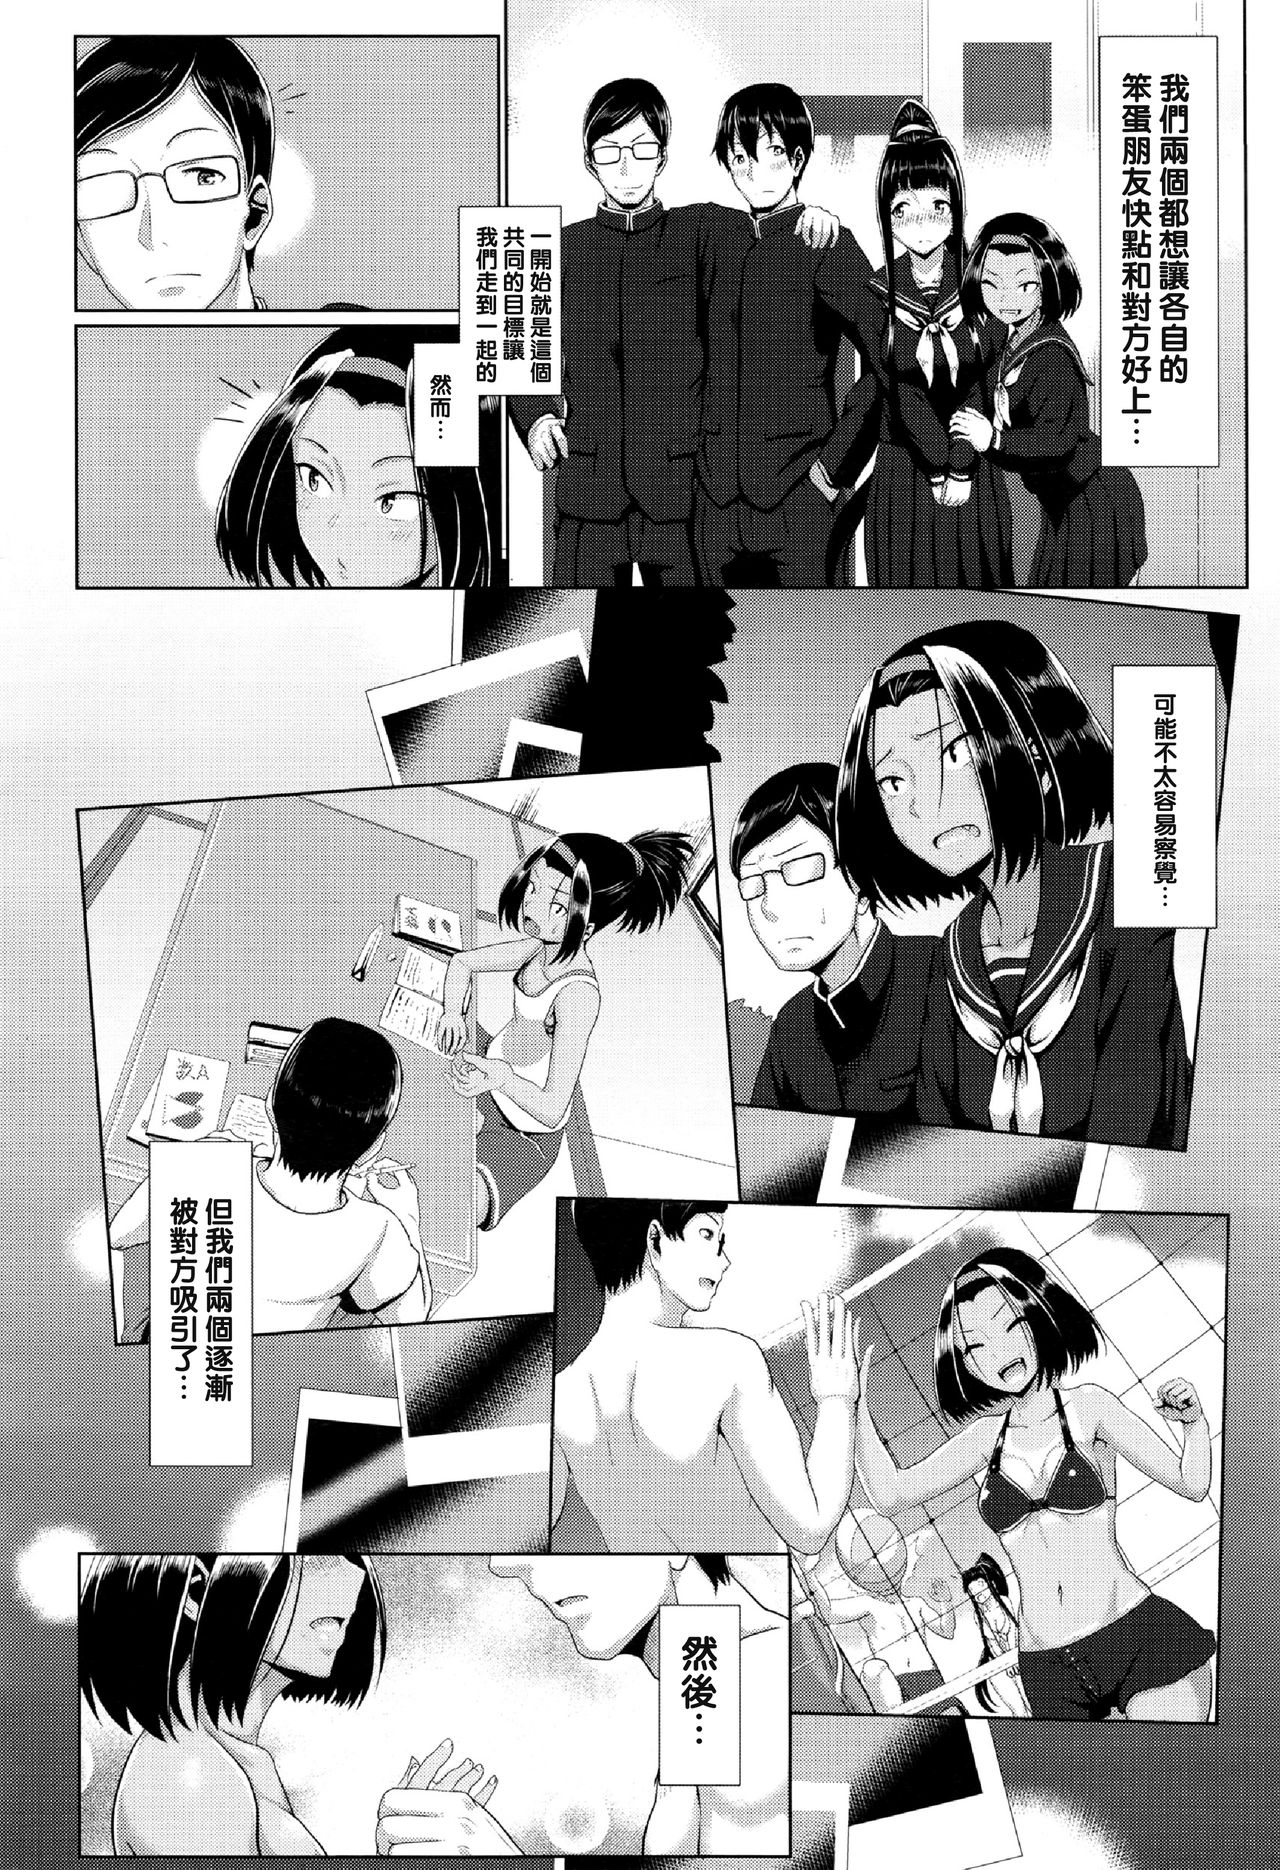 [Shiden Hiro] outframe (COMIC Koh 2016-07) [Chinese] [沒有漢化] [四電ヒロ] outframe (COMIC 高 2016年7月号) [中文翻譯]